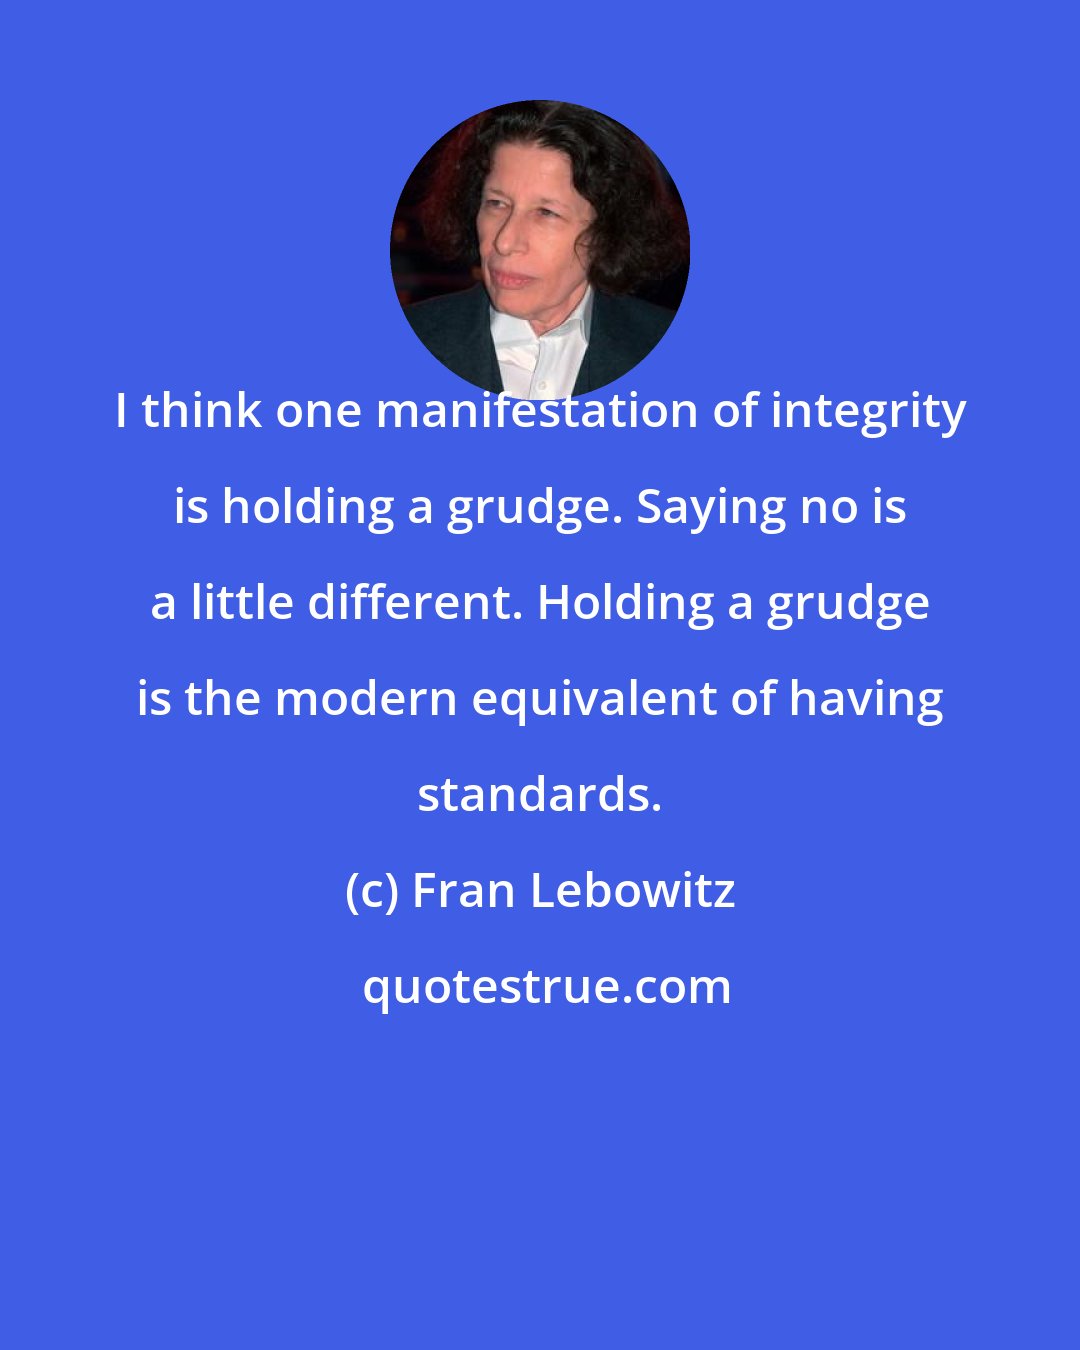 Fran Lebowitz: I think one manifestation of integrity is holding a grudge. Saying no is a little different. Holding a grudge is the modern equivalent of having standards.